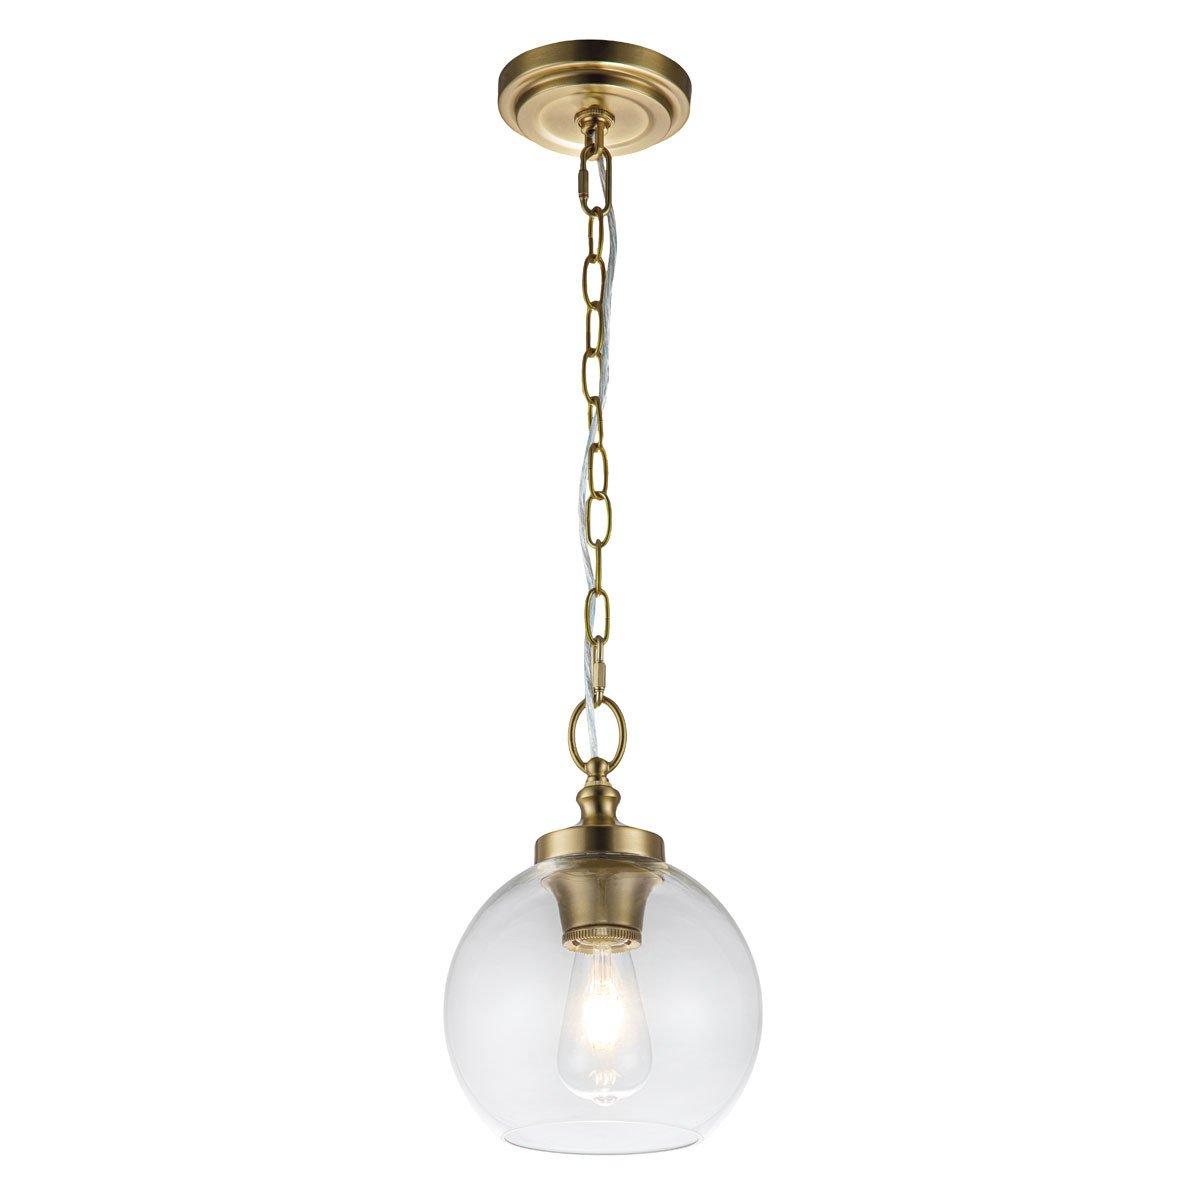 Feiss Tabby Dome Pendant Ceiling Light Burnished Brass